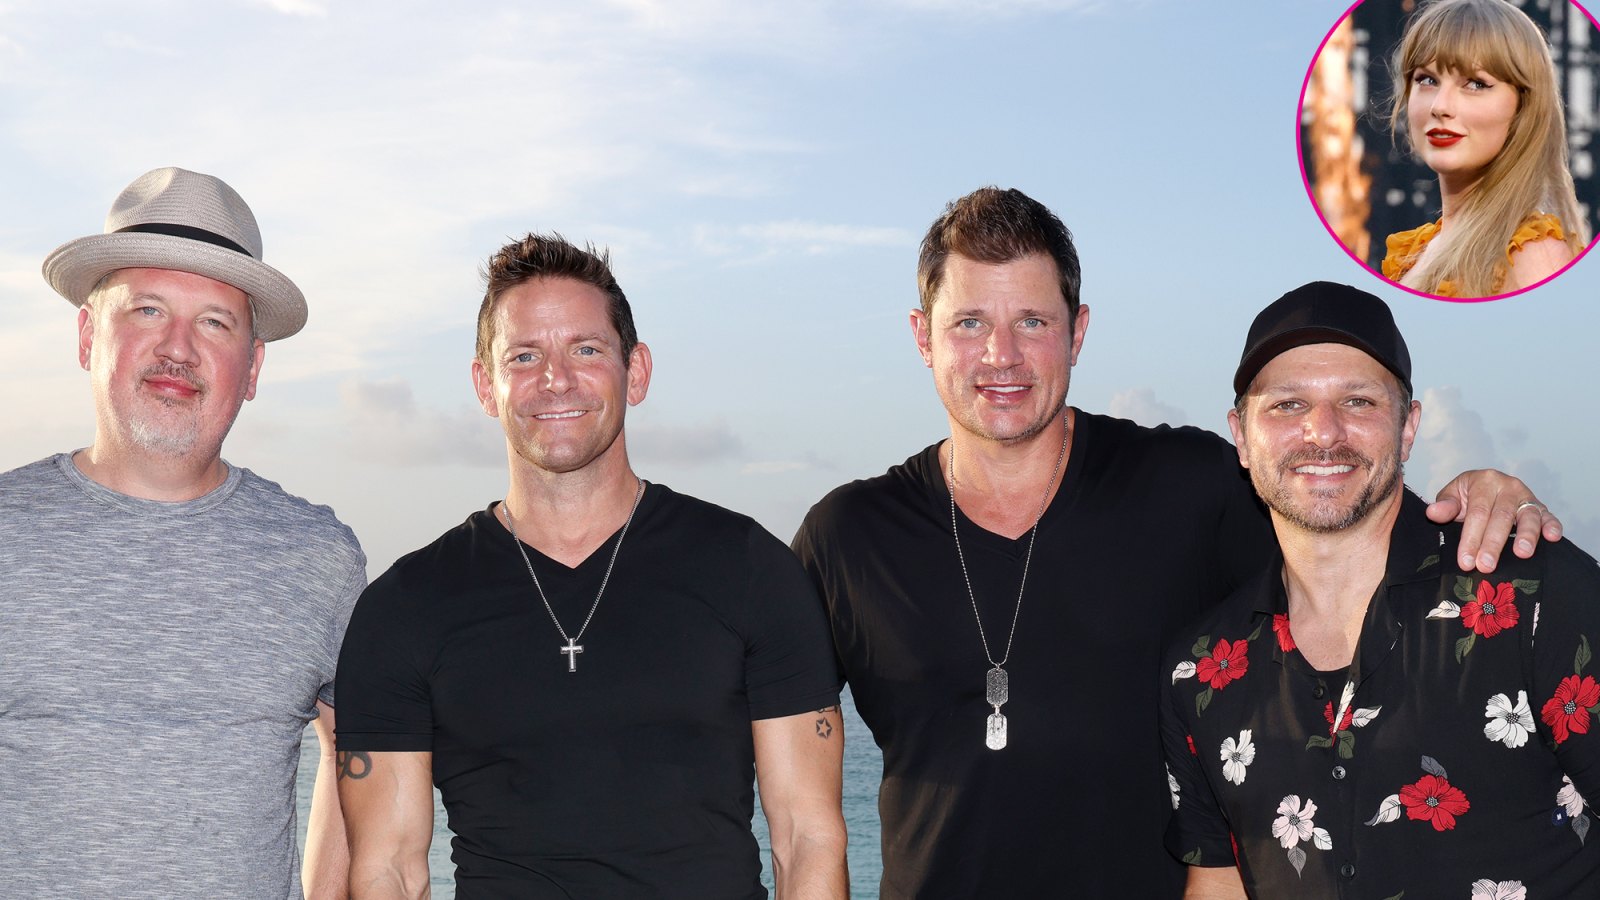 Taylor Swift Inspired 98 Degrees to Rerecord Their Own Music